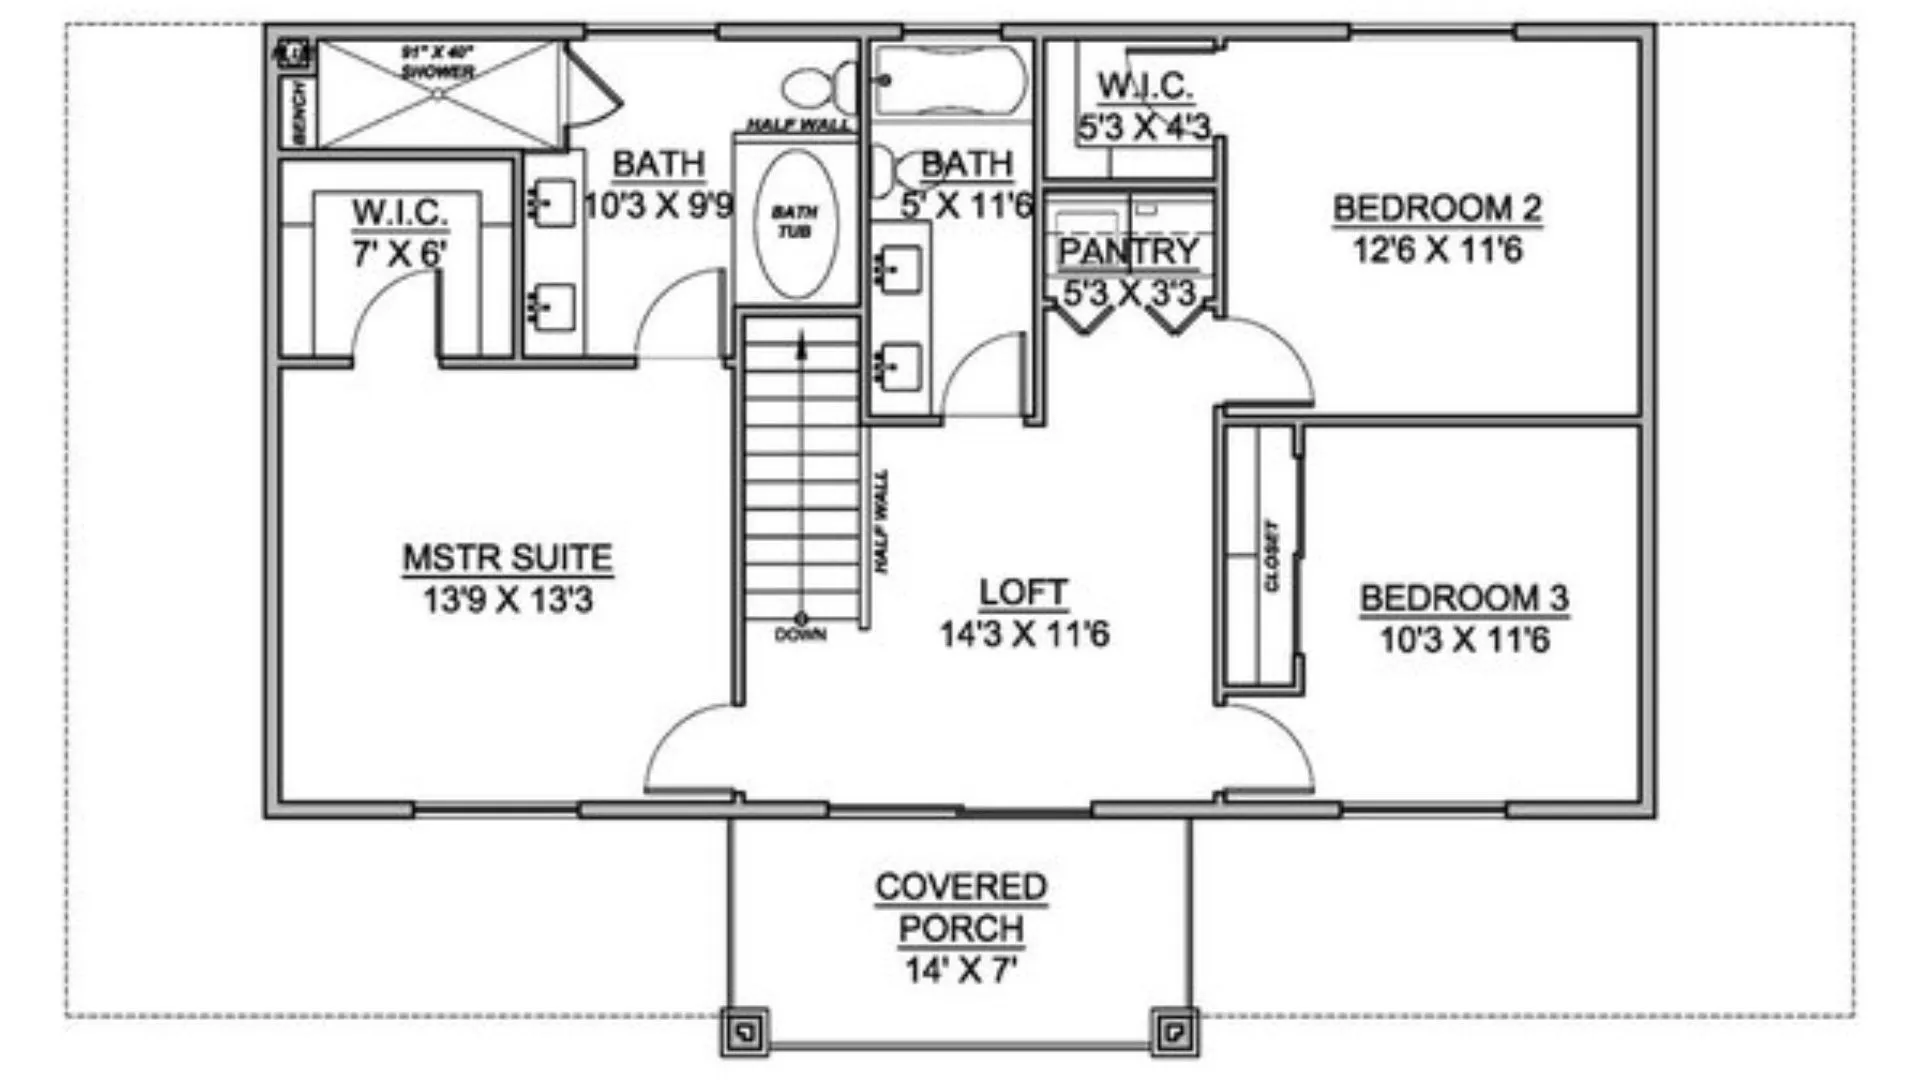 3 bedroom nutec houses plans image